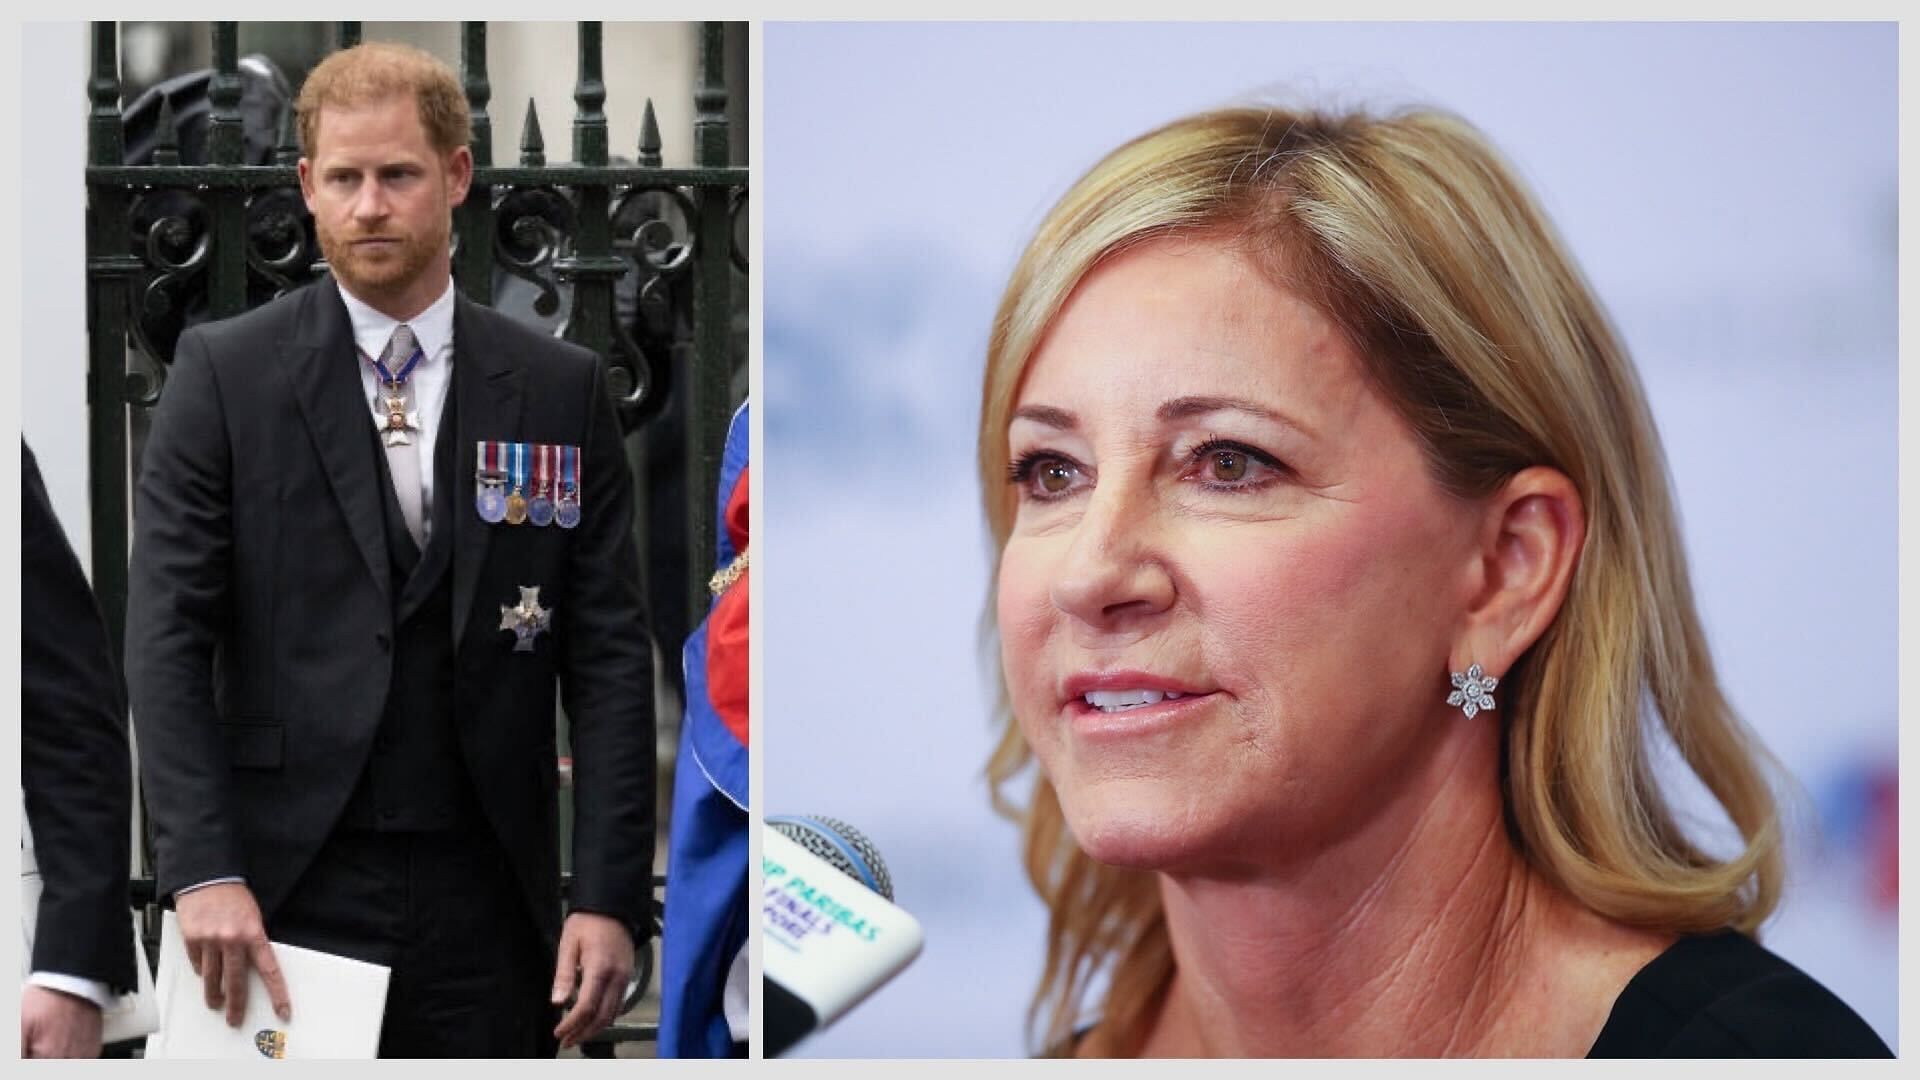 Chris Evert shares her support for Prince Harry amid ongoing criticism